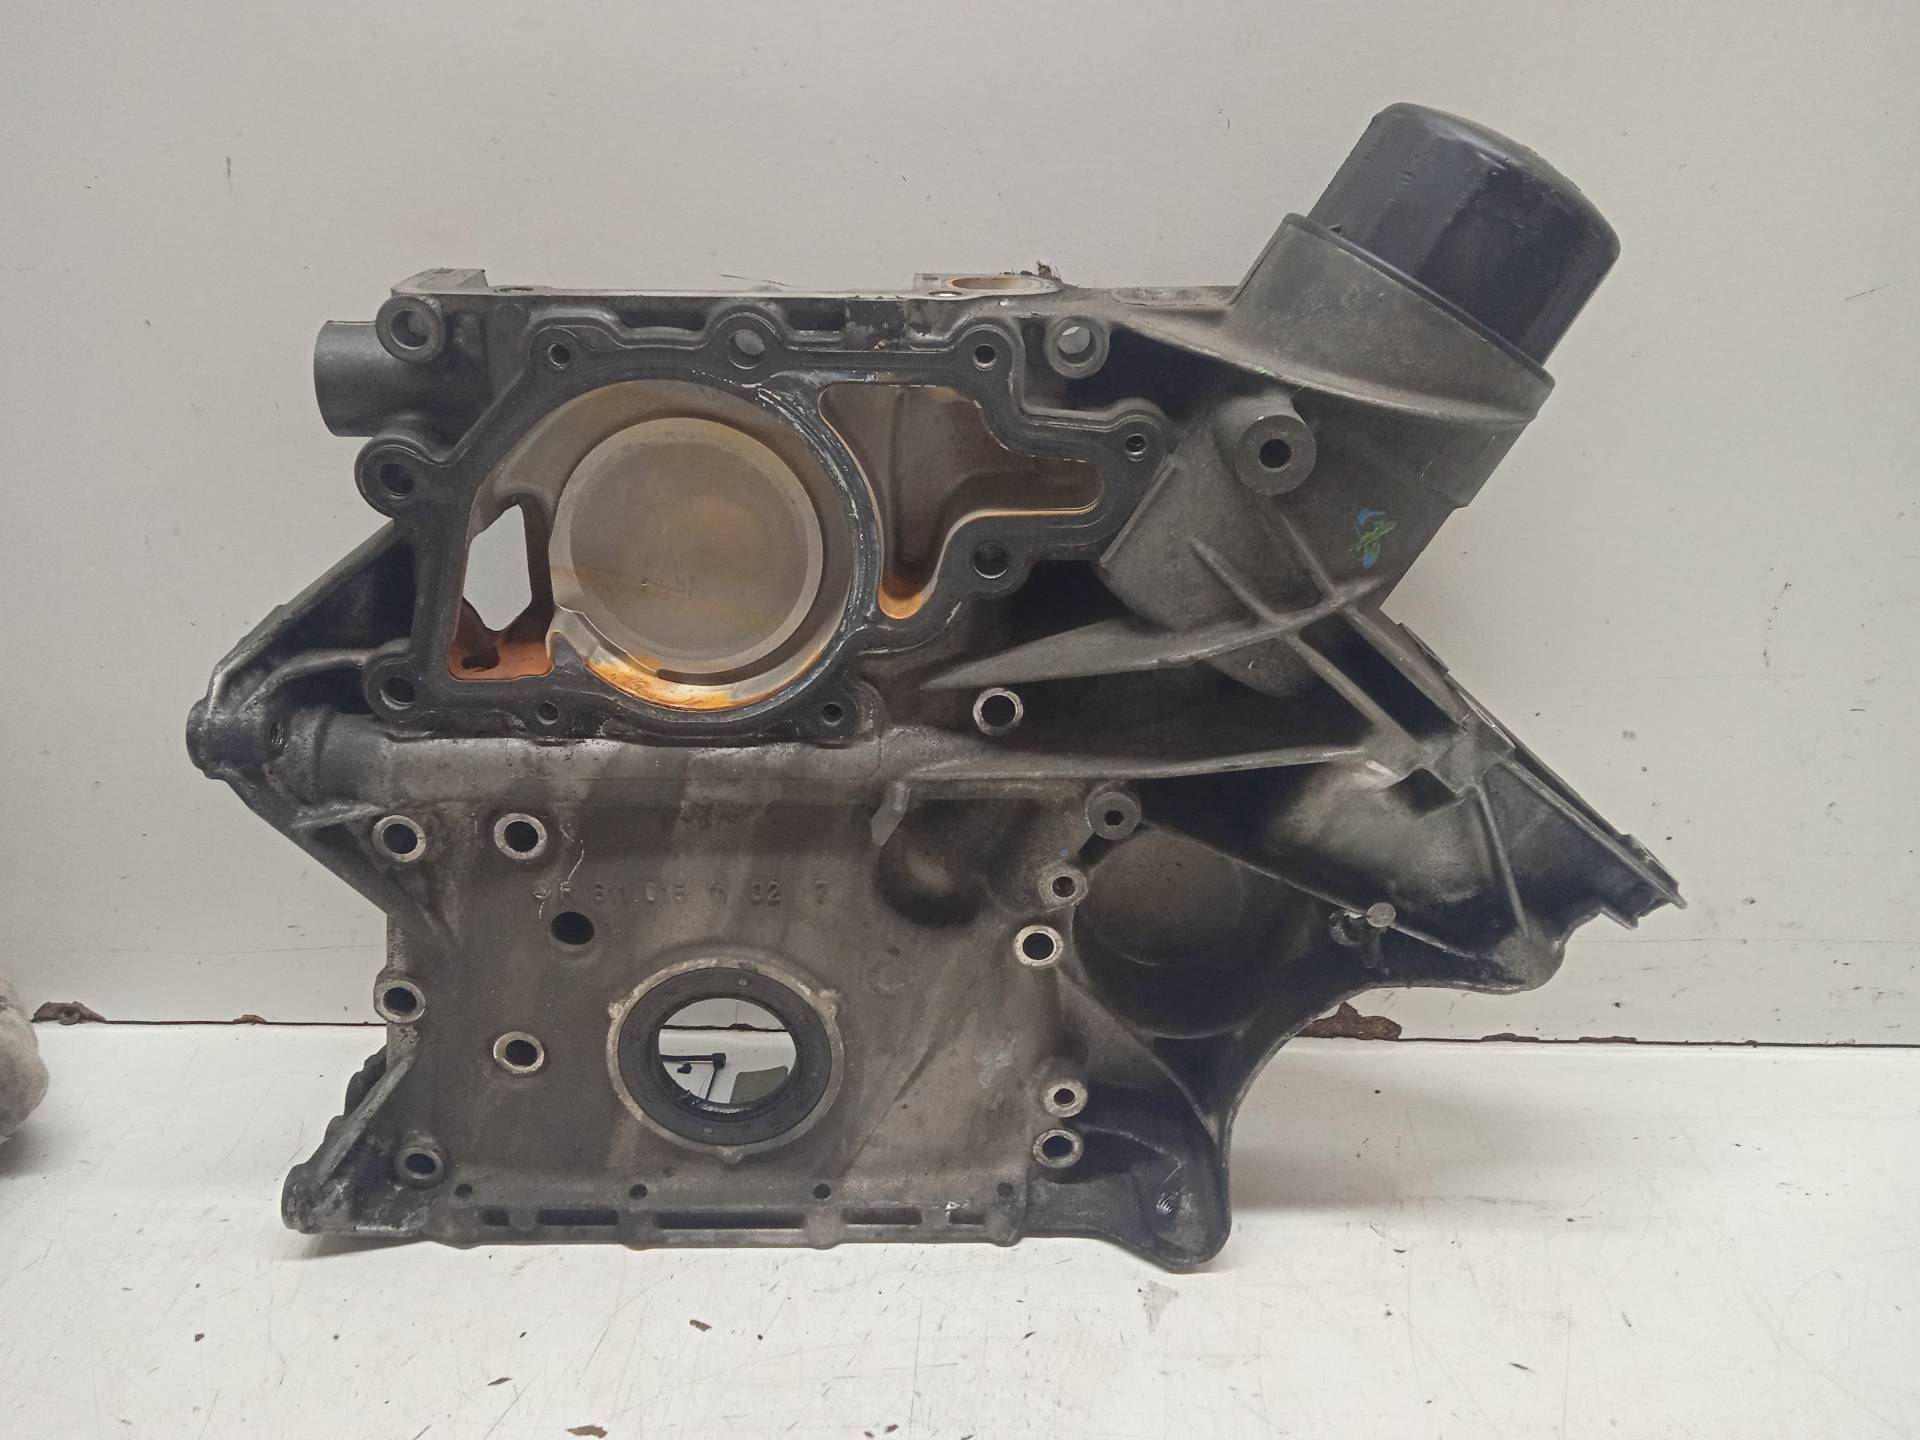 MERCEDES-BENZ M-Class W163 (1997-2005) Other Engine Compartment Parts R61101511027 24335687